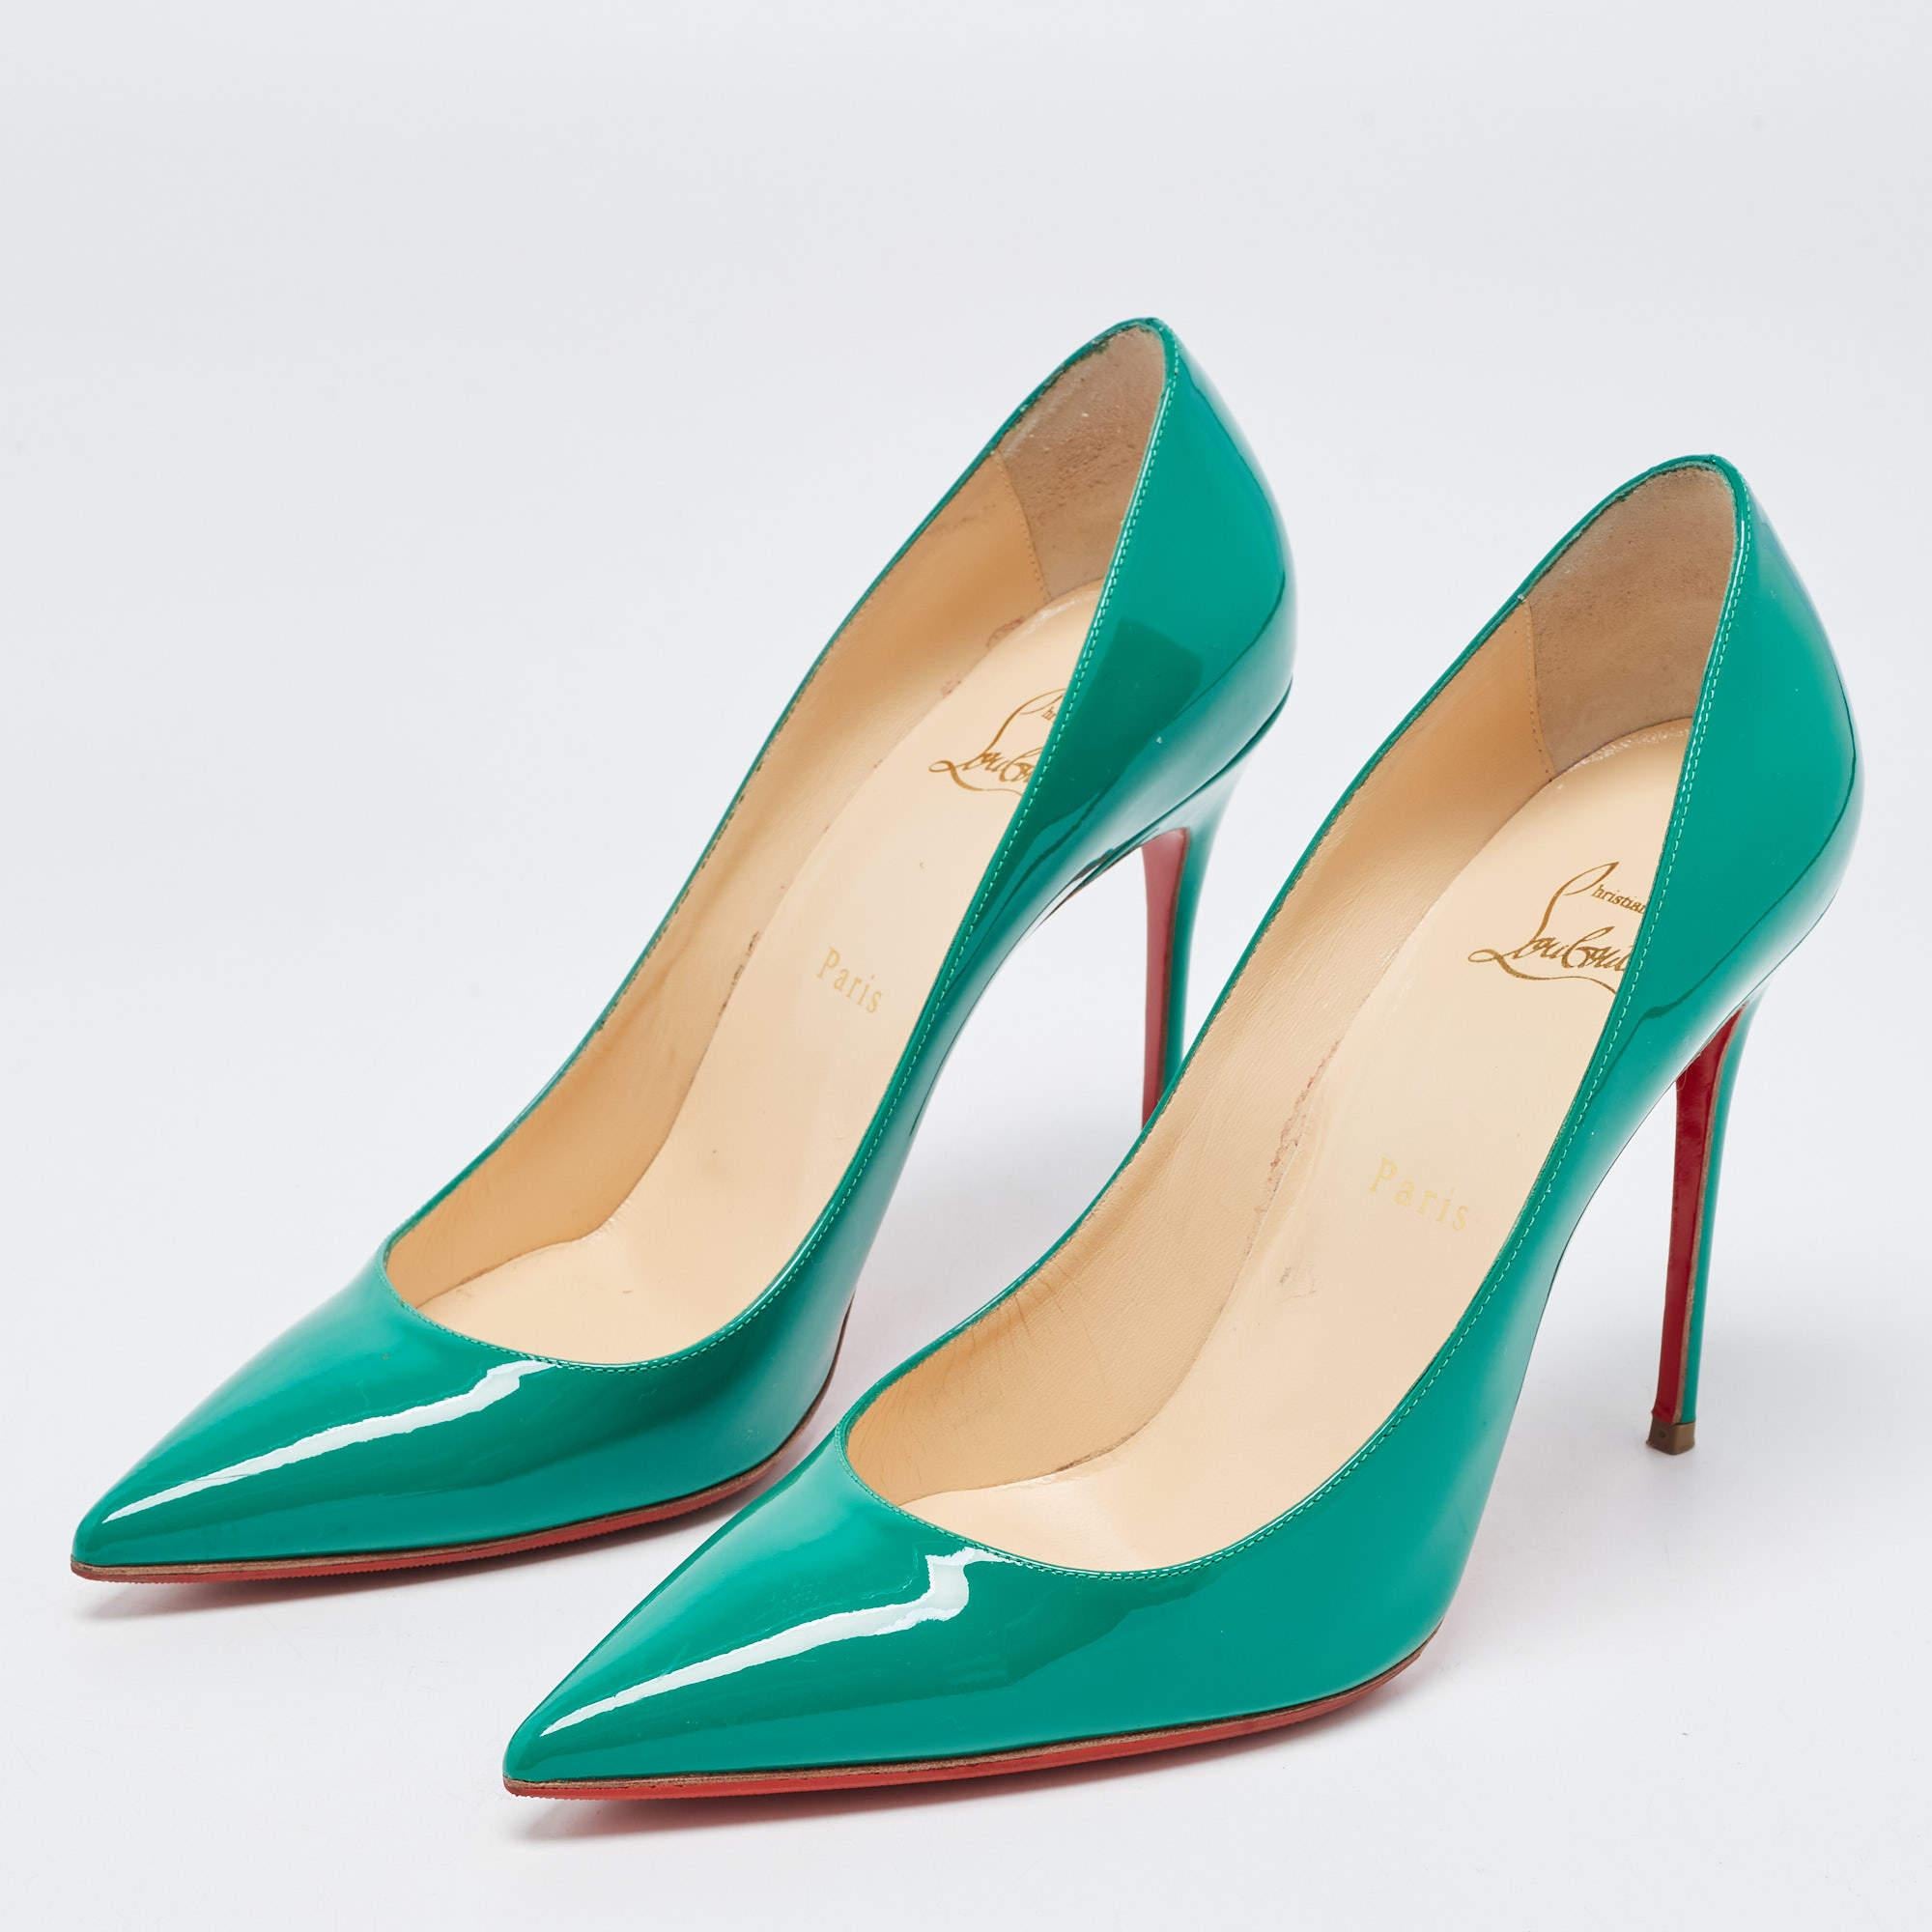 Women's Christian Louboutin Green Patent Leather So Kate Pointed Toe Pumps Size 40